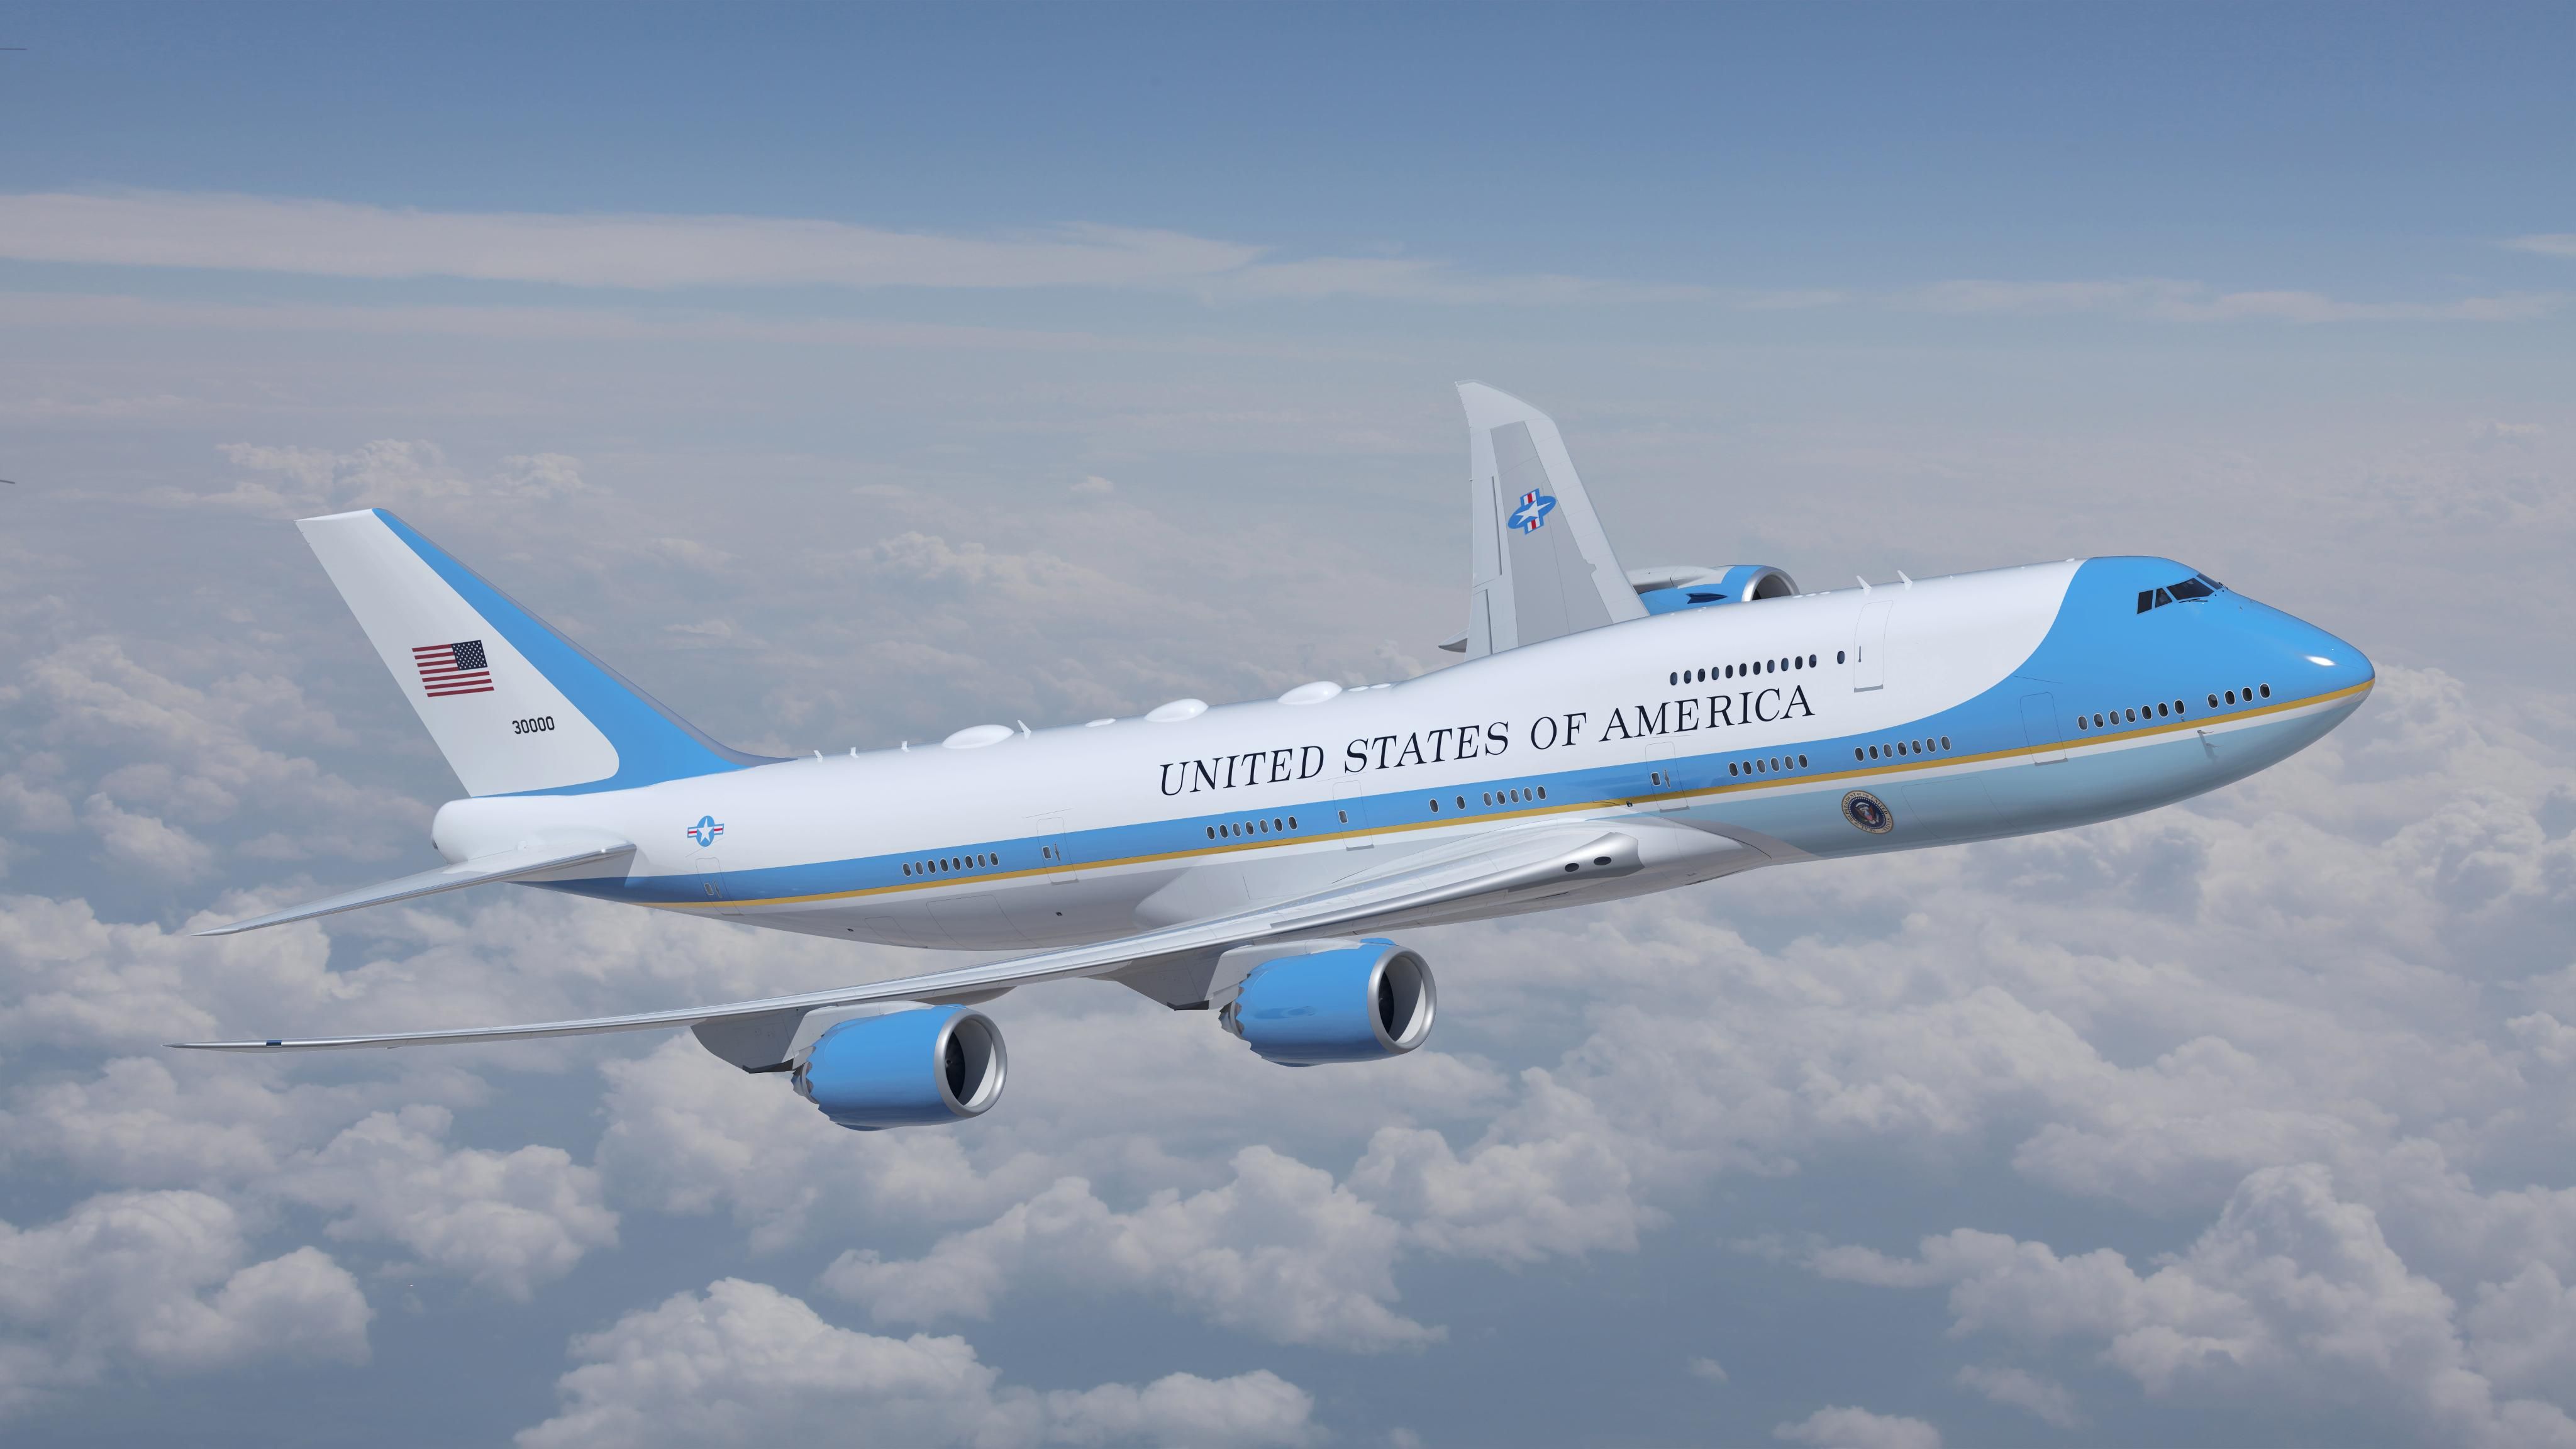 Vc 25b Everything We Know About The New Air Force One Boeing 747 8s So Far